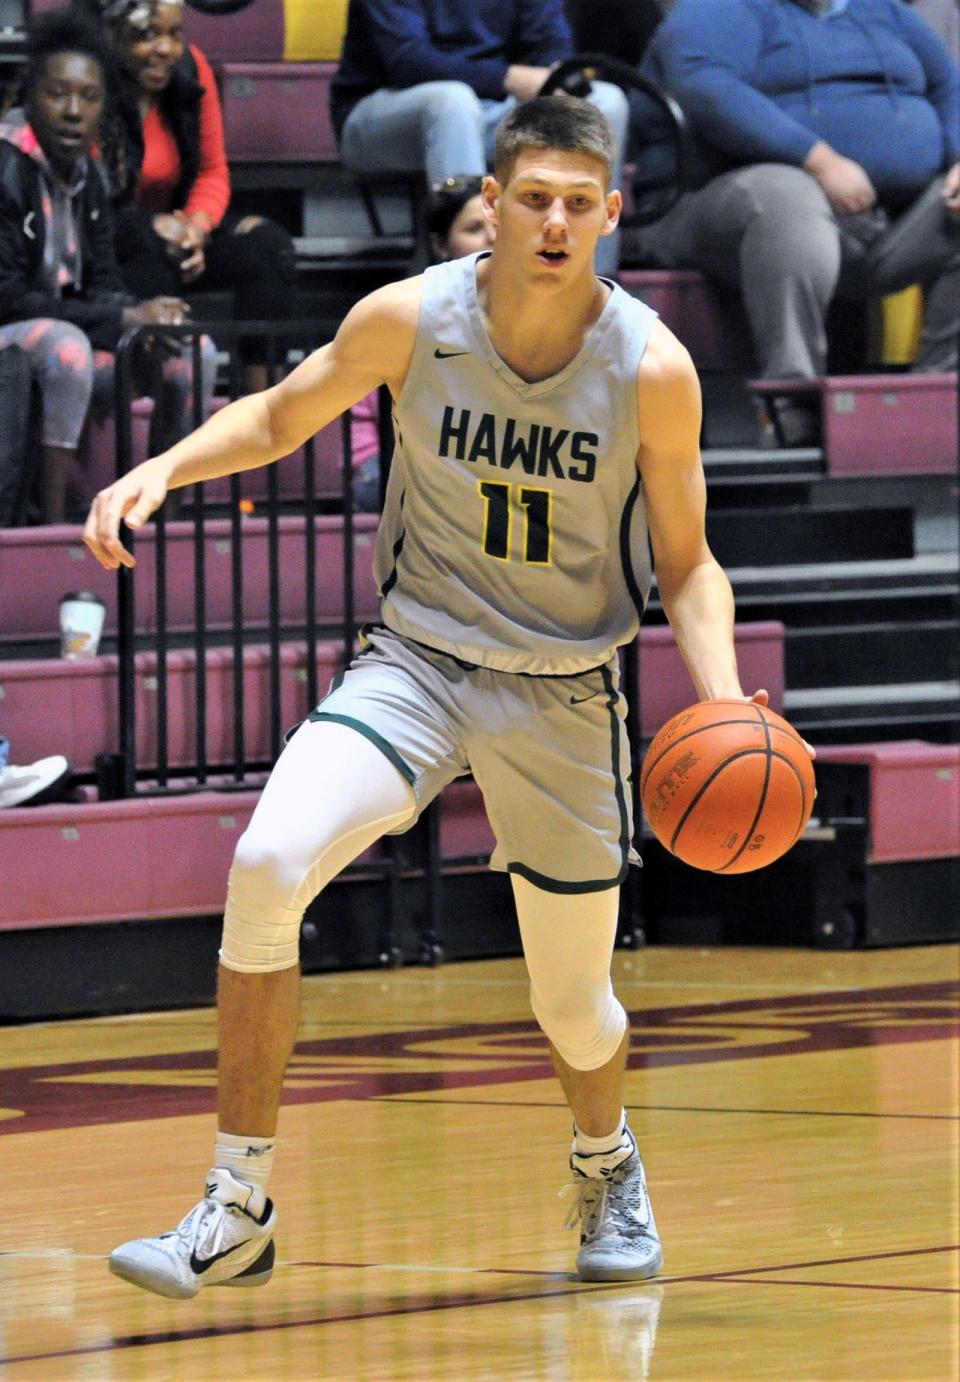 Birdville's Gehrig Normand dribbles the ball down the court against Plano East on Saturday, November 27, 2021 at MSU.
BKH-BIRDVILLE-PLANOEAST2